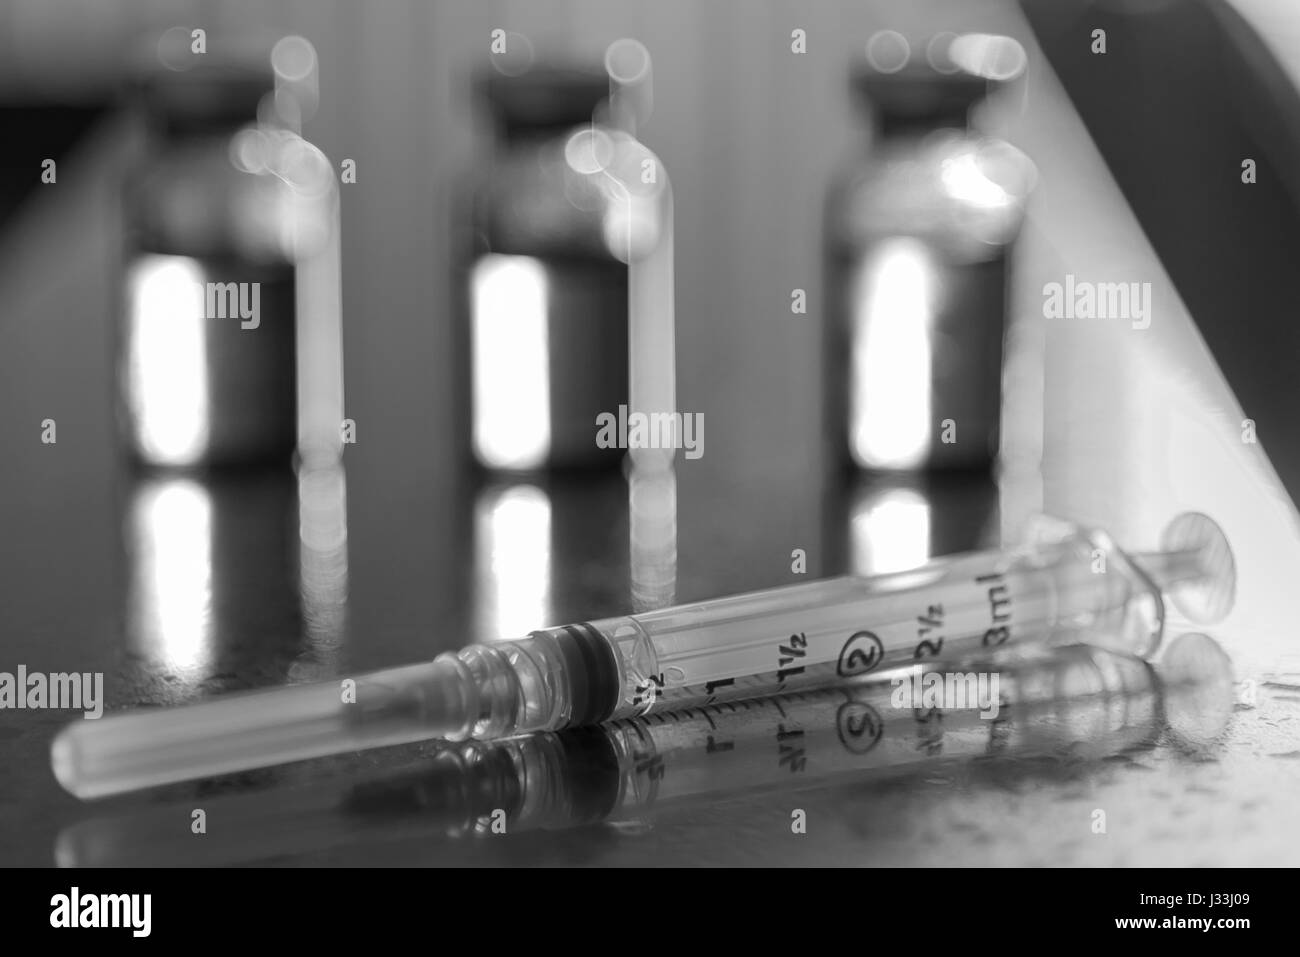 Vials of medicine and syringes Stock Photo